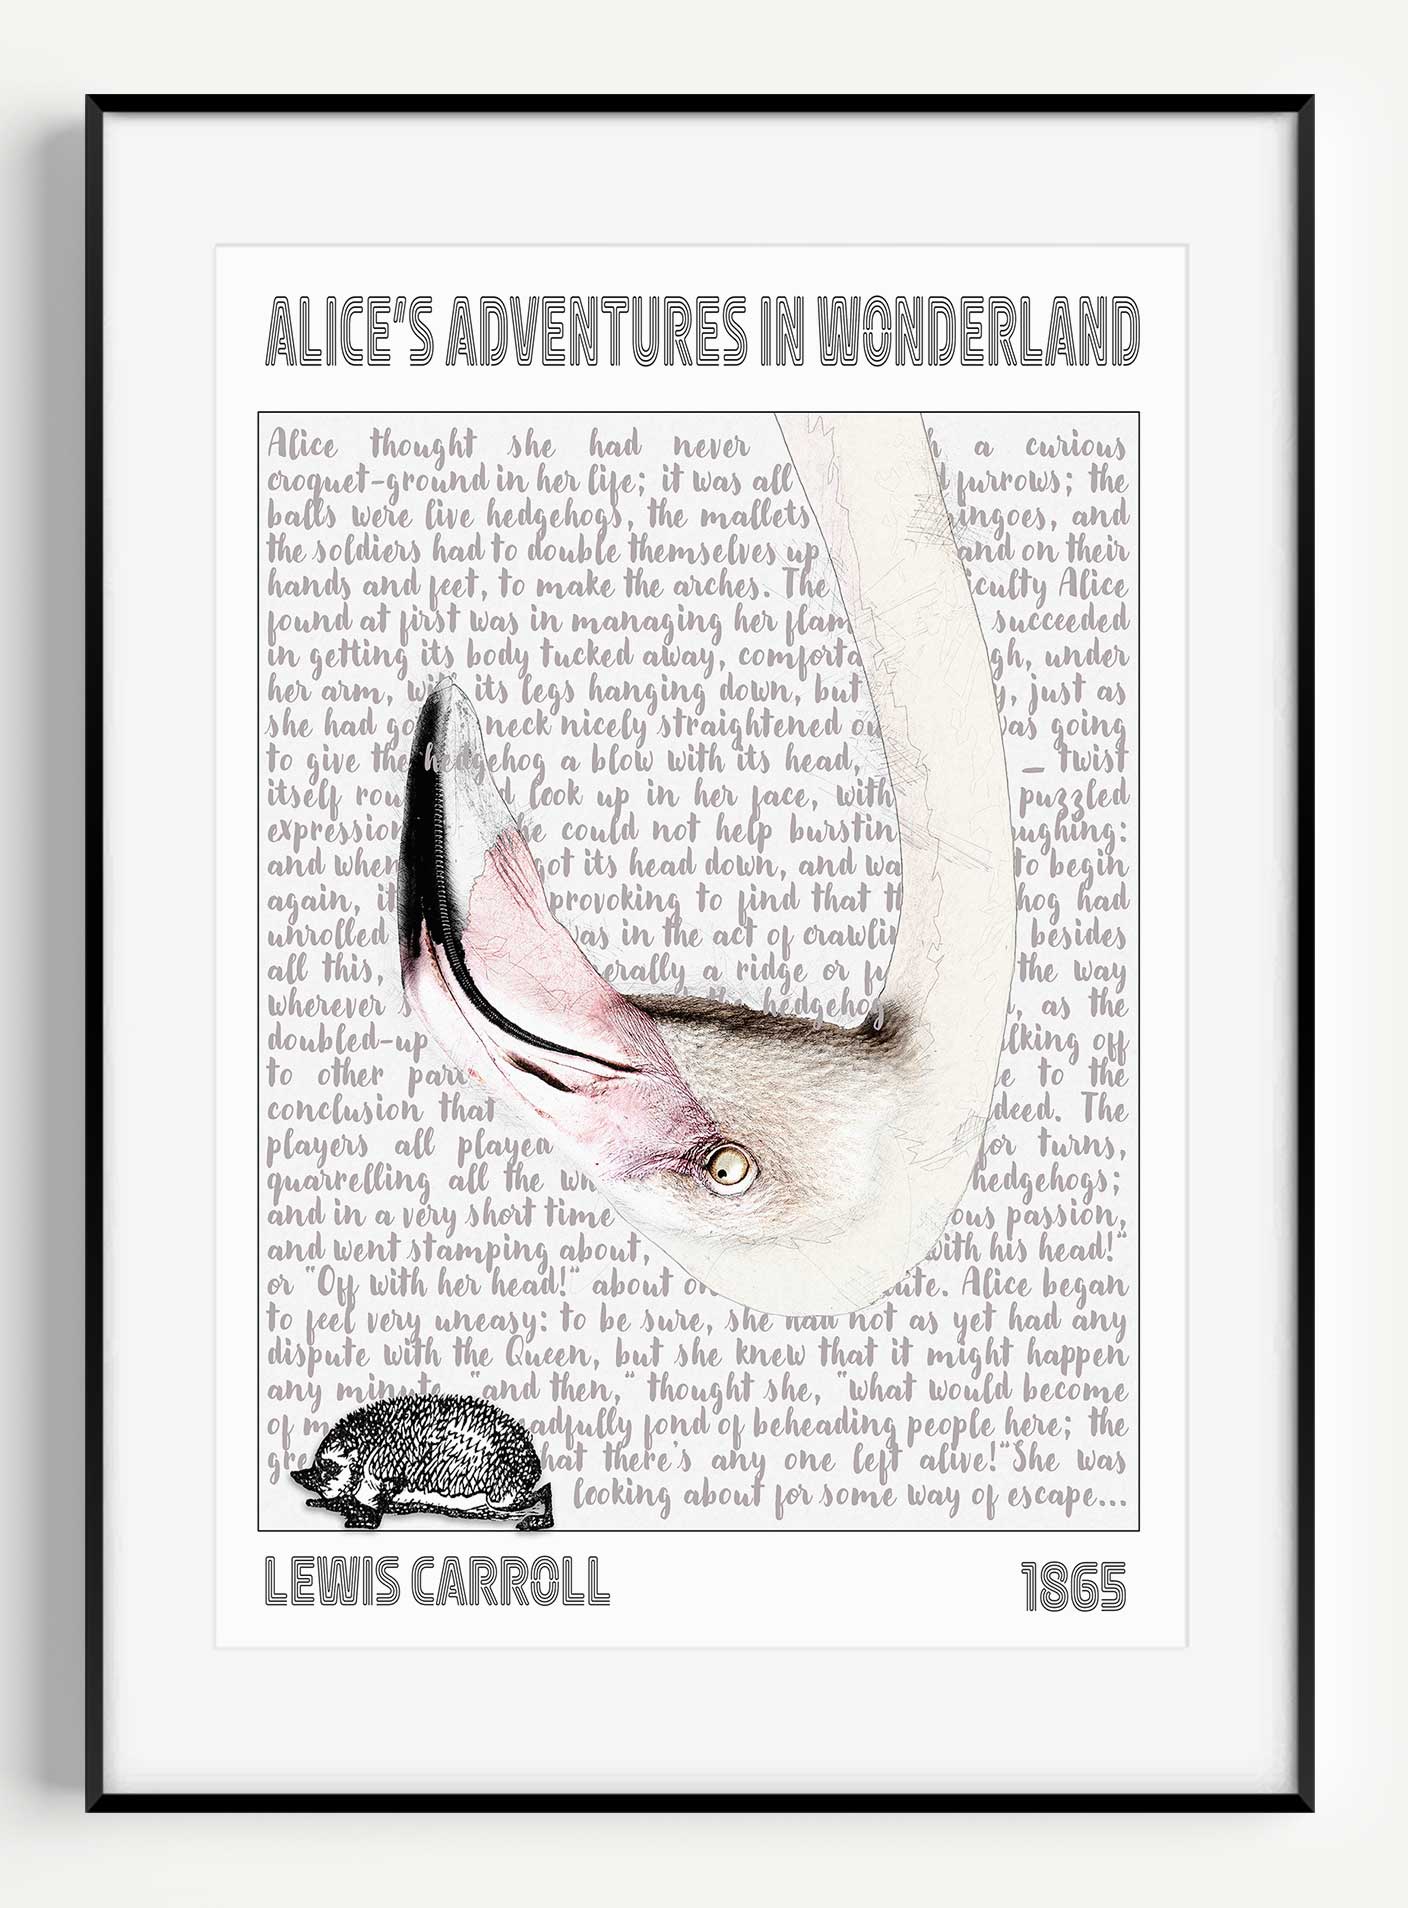 Alice in Wonderland Collection